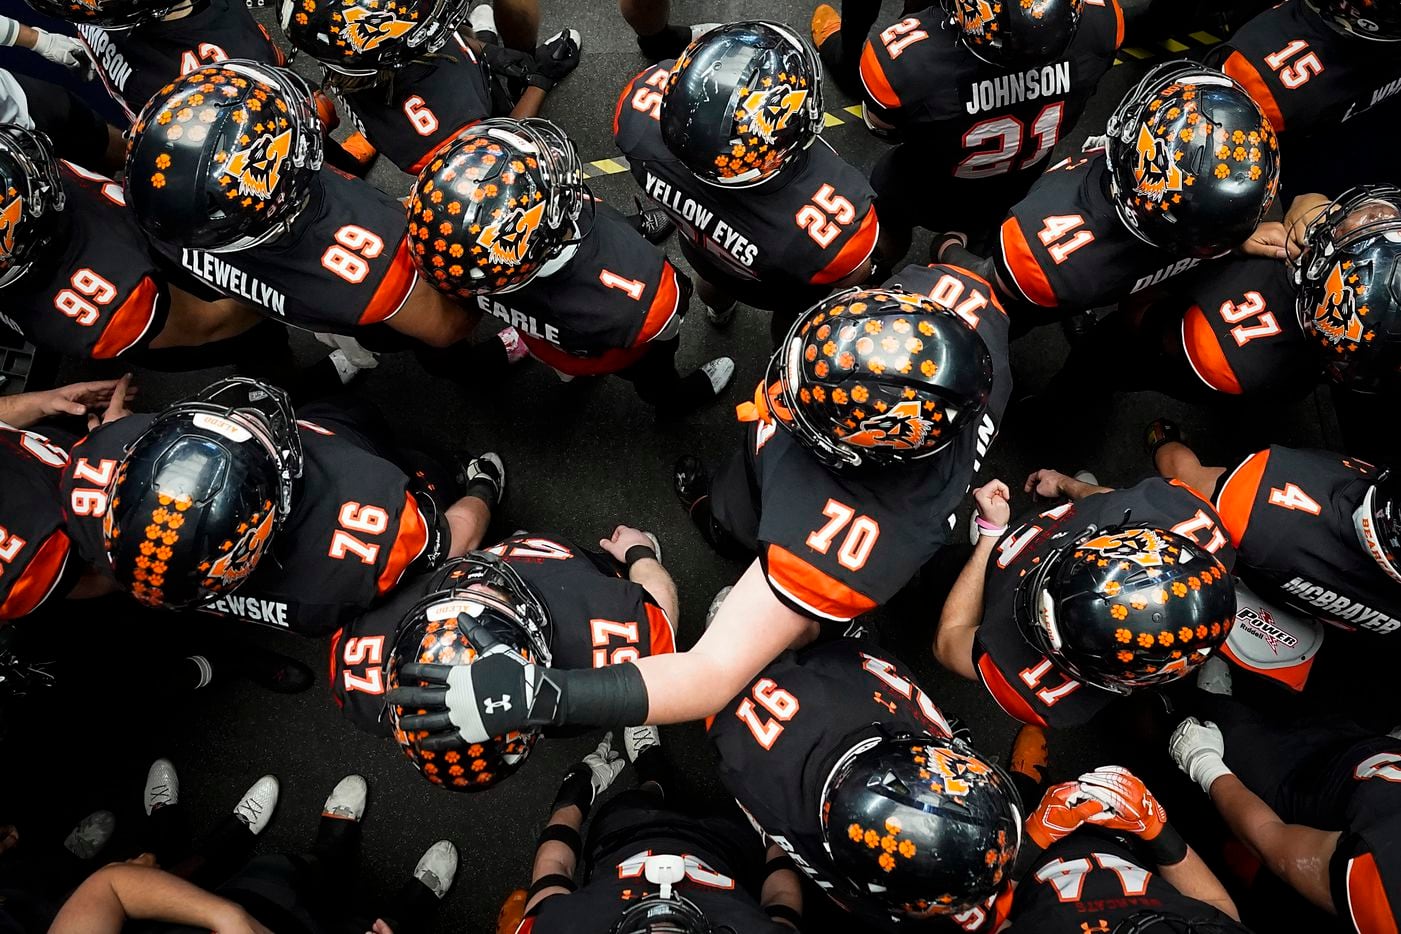 Aledo players, including offensive lineman Jurrien Loftin (70) and offensive lineman Brady Wood (57) wait to take the field before the first half of the Class 5A Division II state football championship game against Crosby at AT&T Stadium on Friday, Jan. 15, 2021, in Arlington. (Smiley N. Pool/The Dallas Morning News)